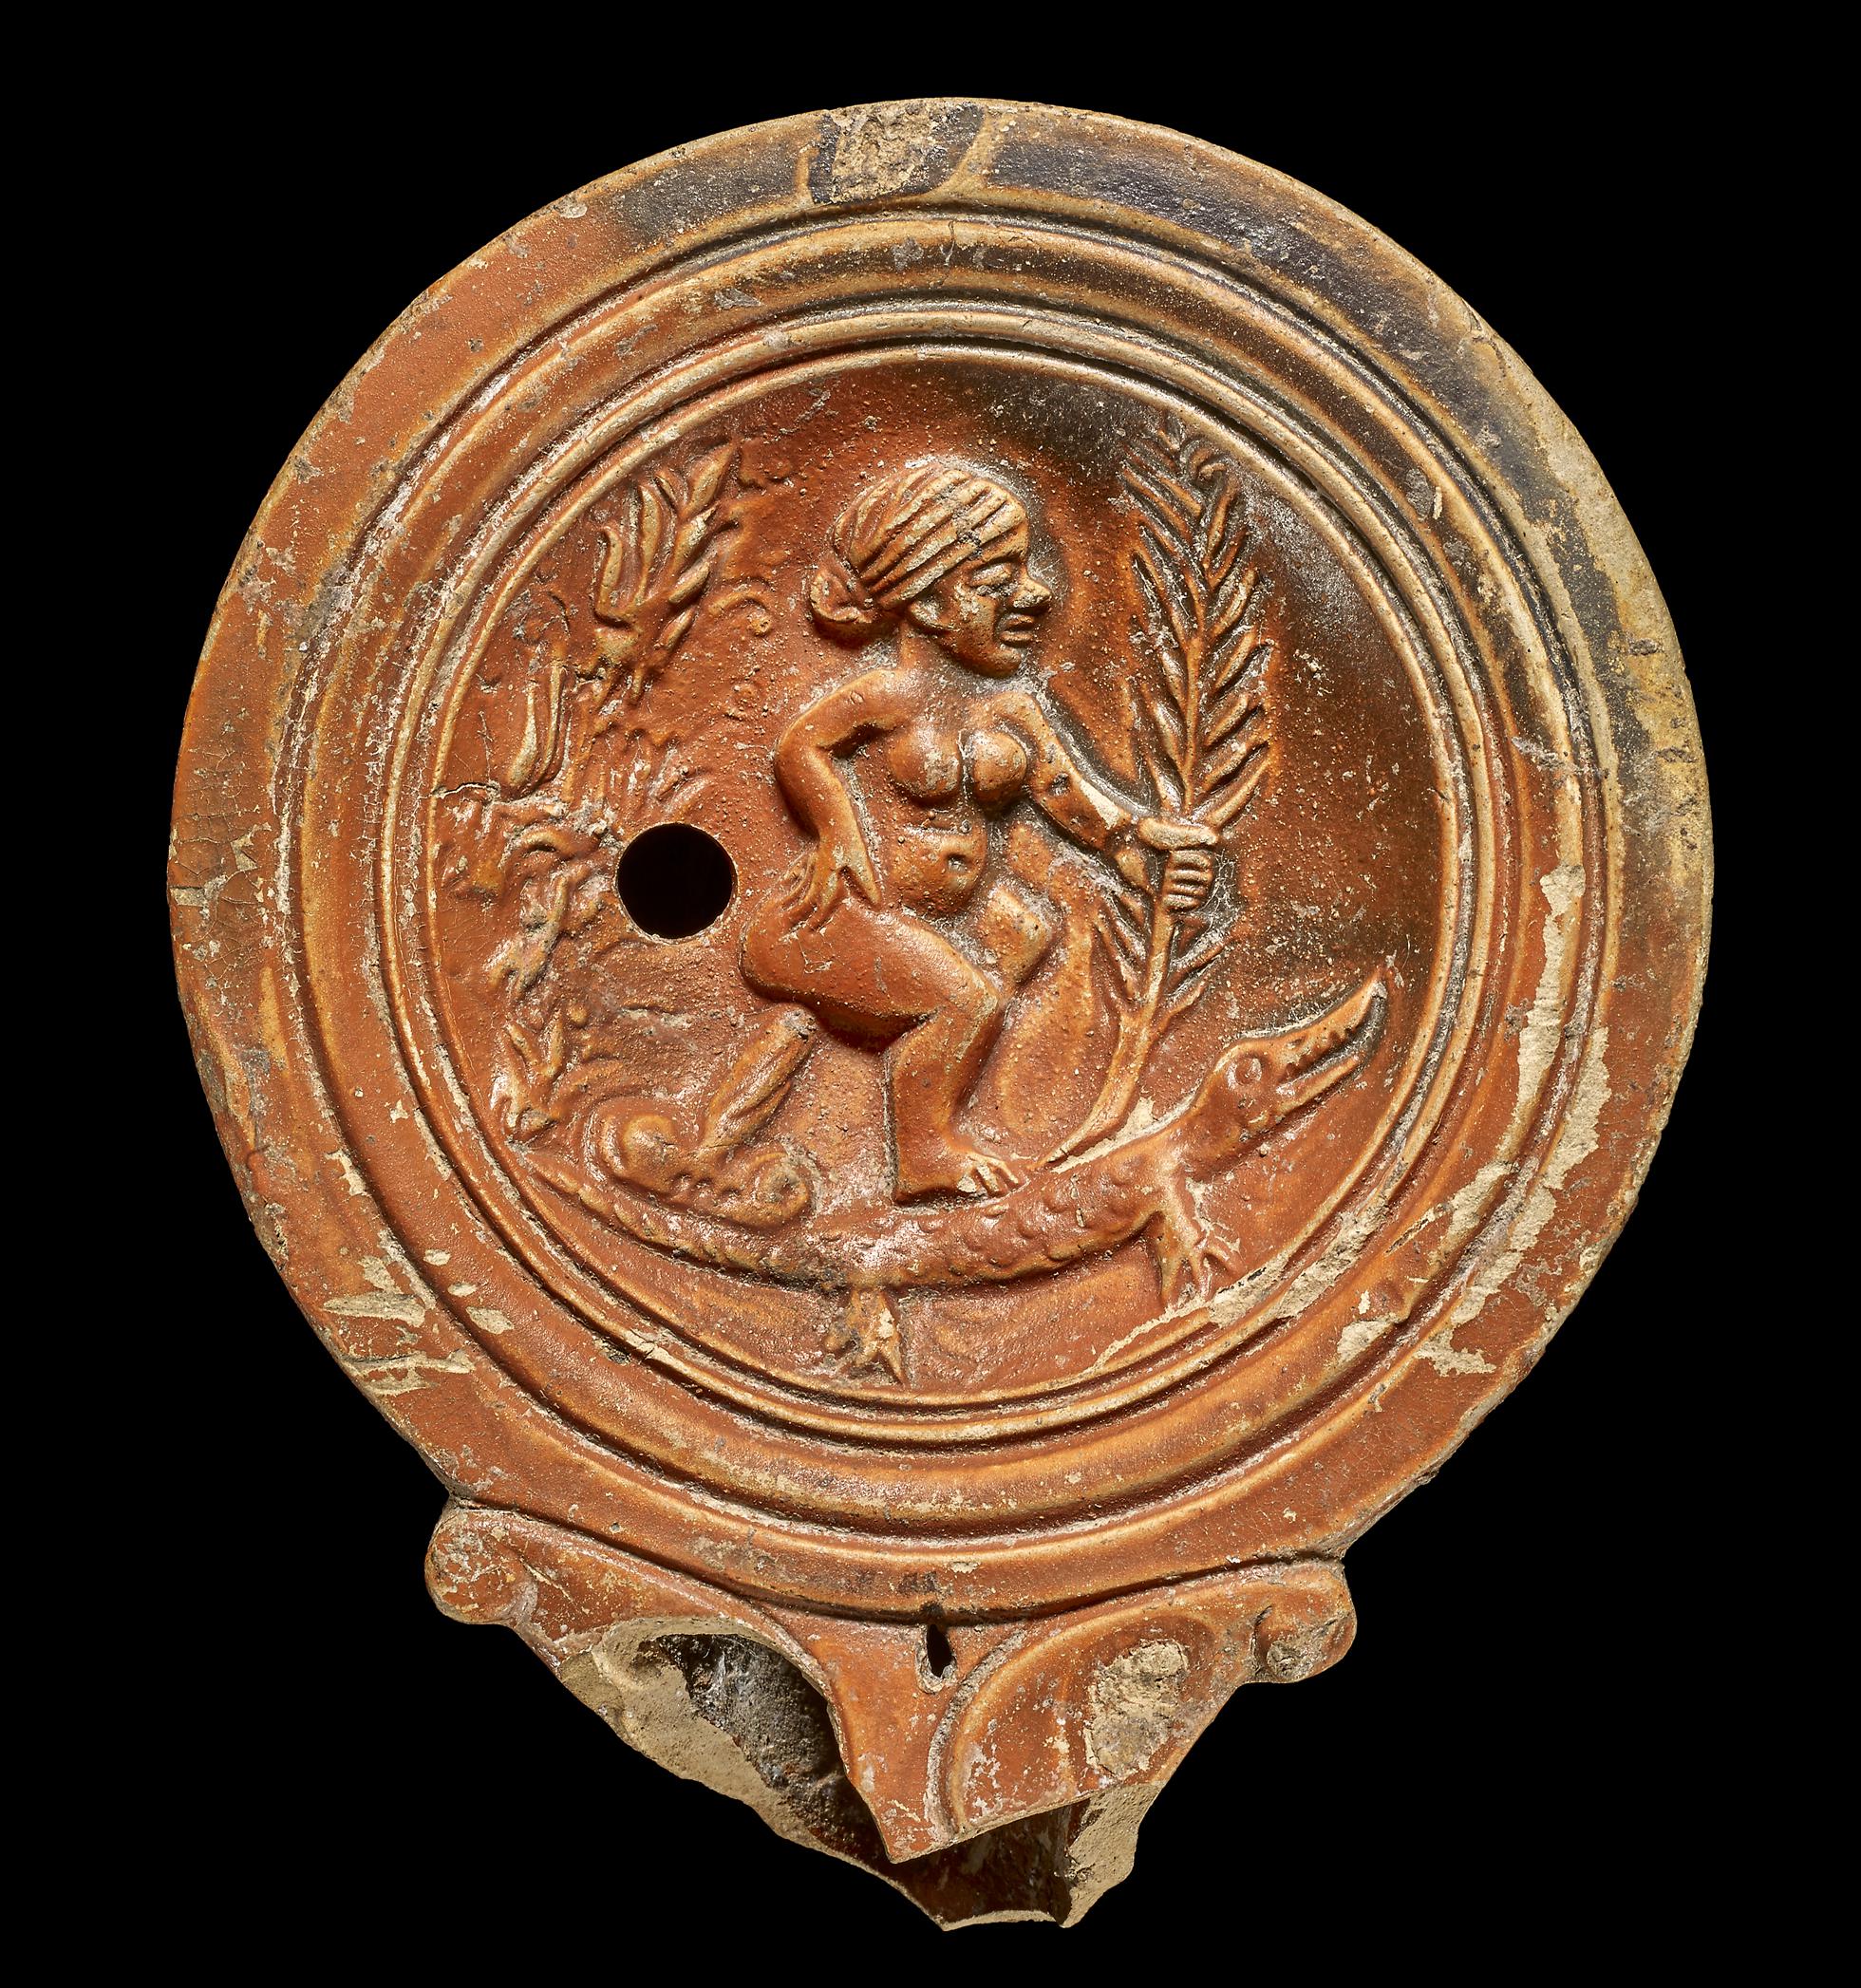 A Roman terracotta oil lamp, probably an obscene caricature of Cleopatra. After her death in 30 BCE, Octavian began a campaign to discredit the Queen of Egypt. Italy, 40-80 CE.jpg